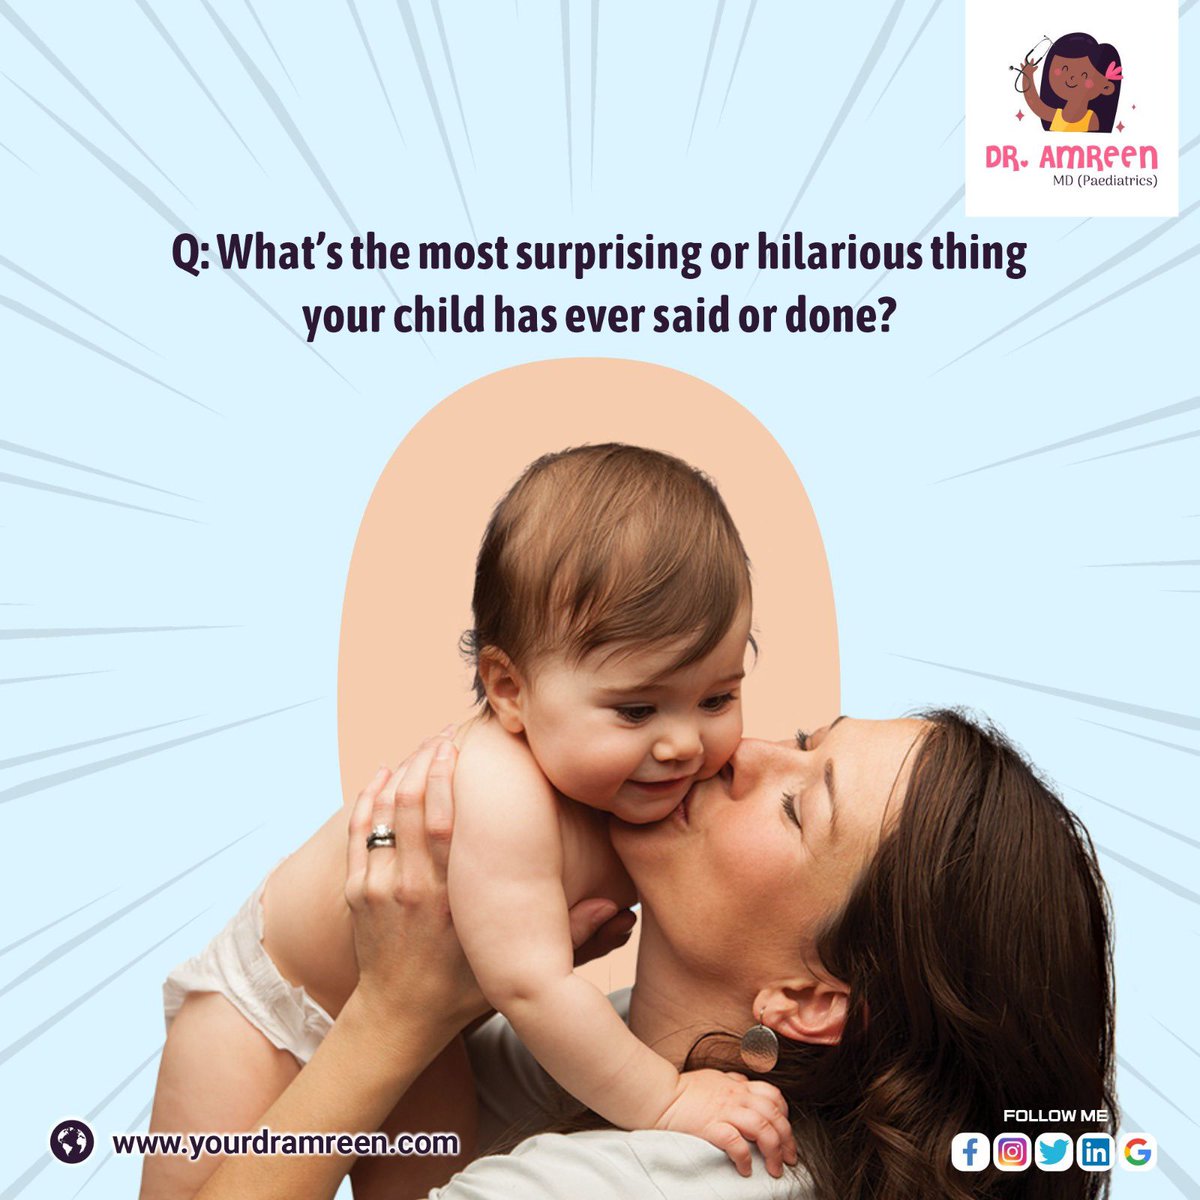 What's the most surprising or hilarious thing your child has ever said or done? 😄

Let's fill the comments with laughter and joy. Share your stories below!👇

#KidsSayTheDarndestThings #DrAmreen #YourDrAmreen #CaspianHealthcare #Hyderabad